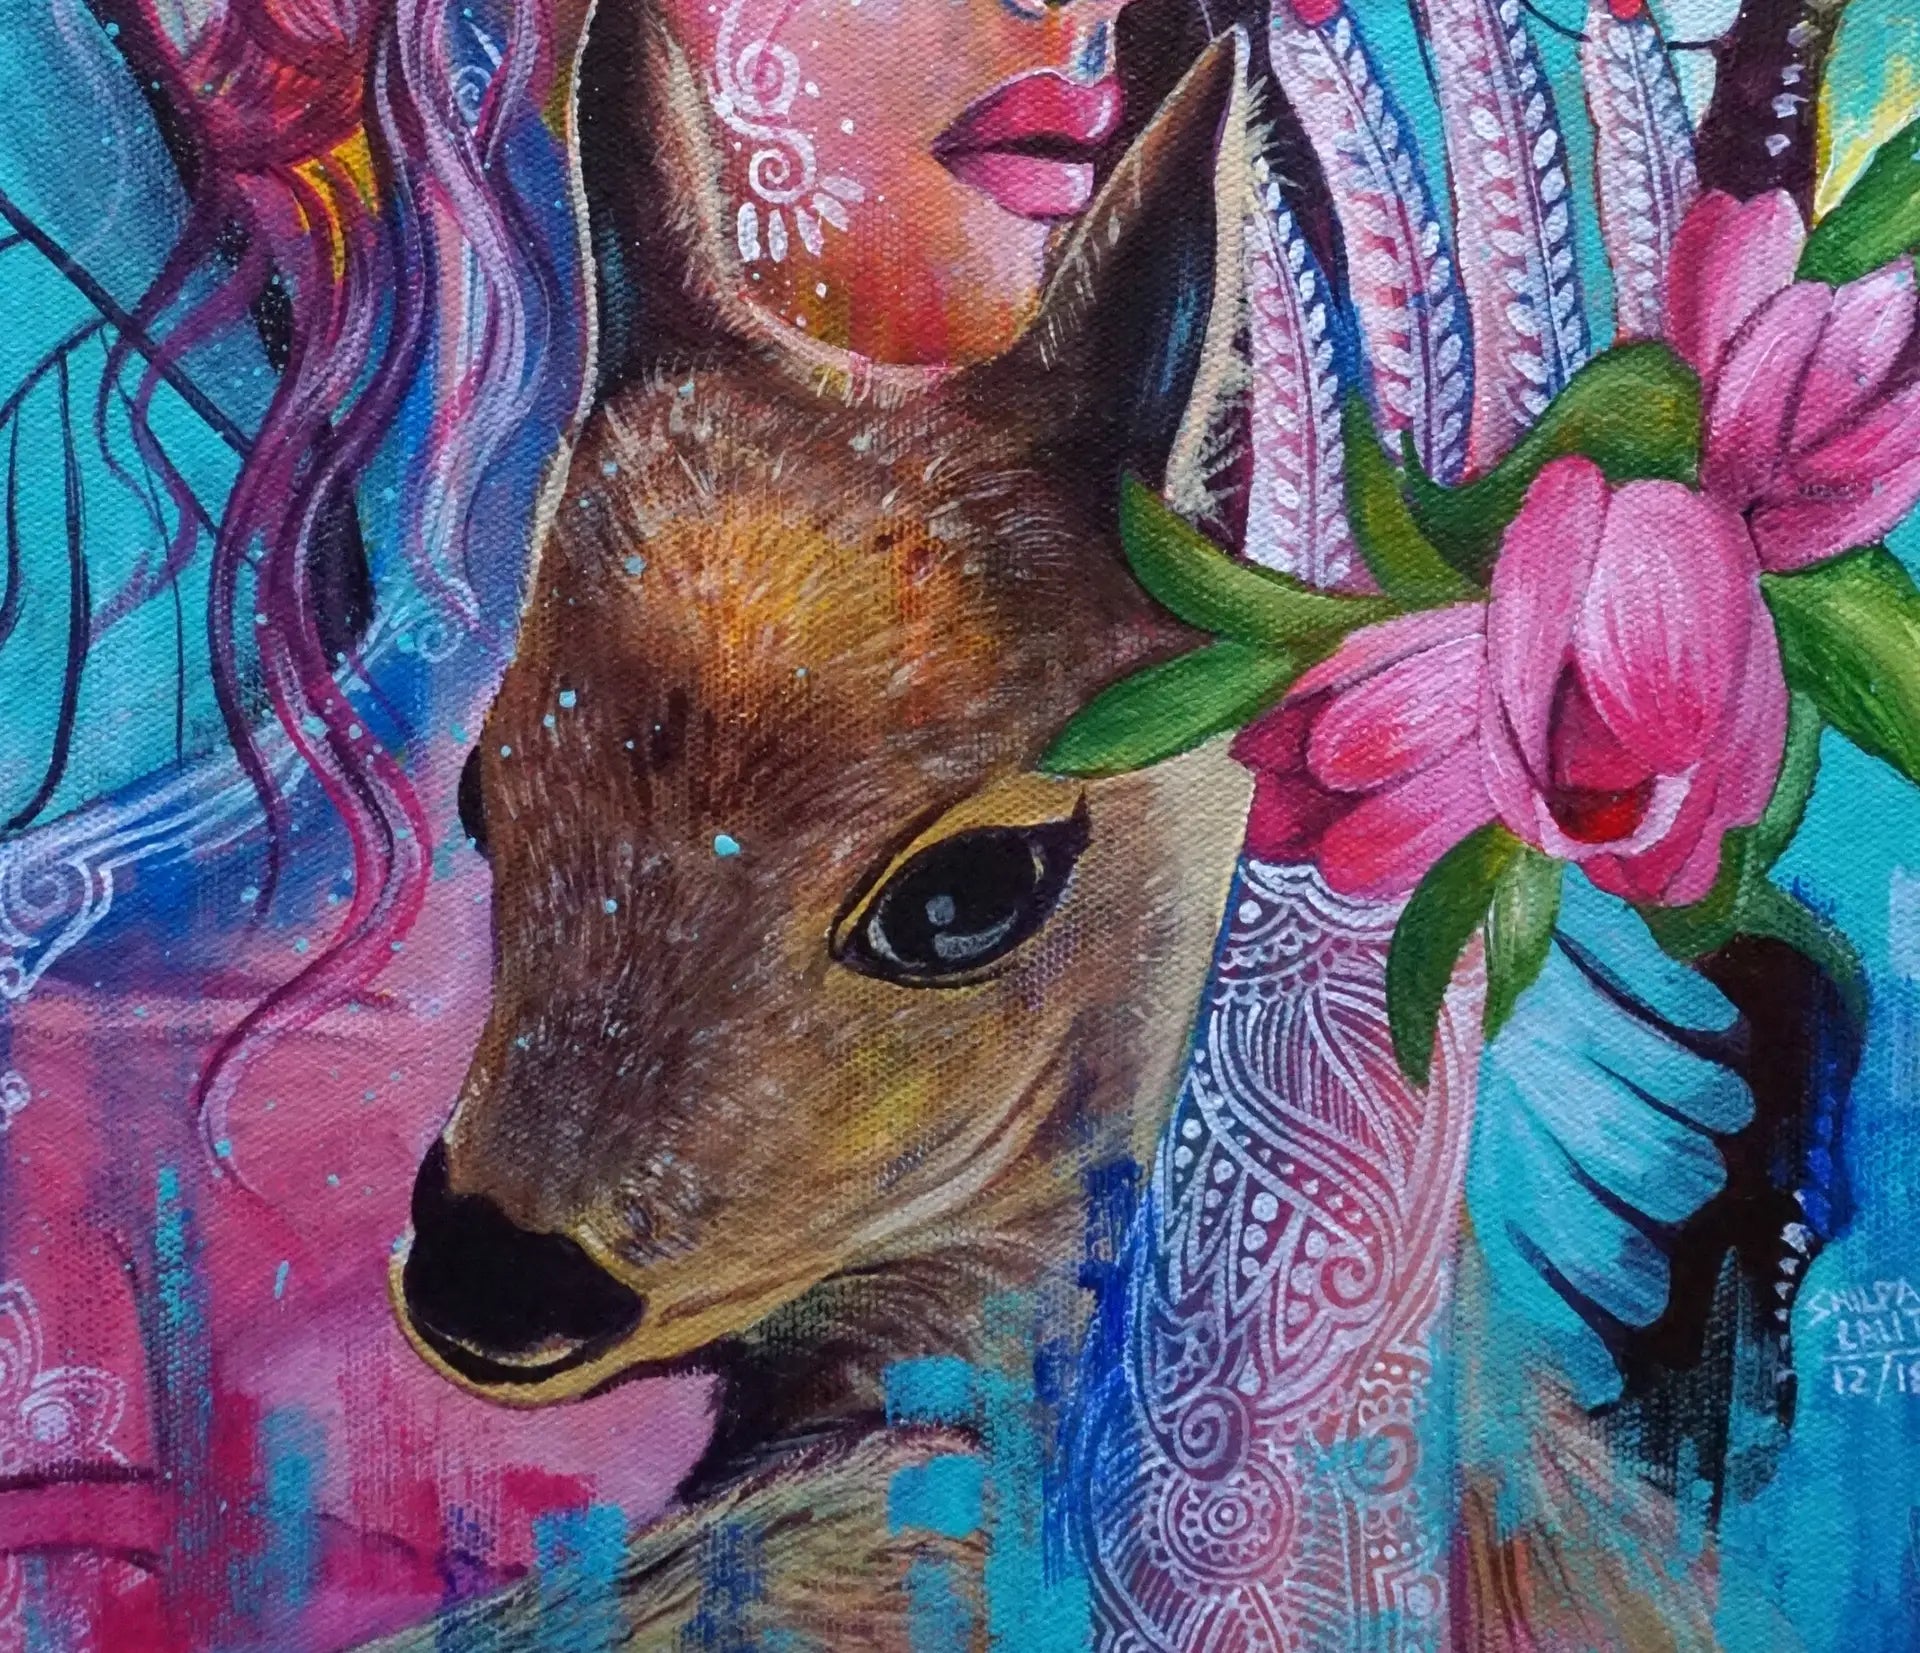 Enchanting Butterfly Girl and Majestic Deer Painting: A Step-by-Step Guide for Beginners